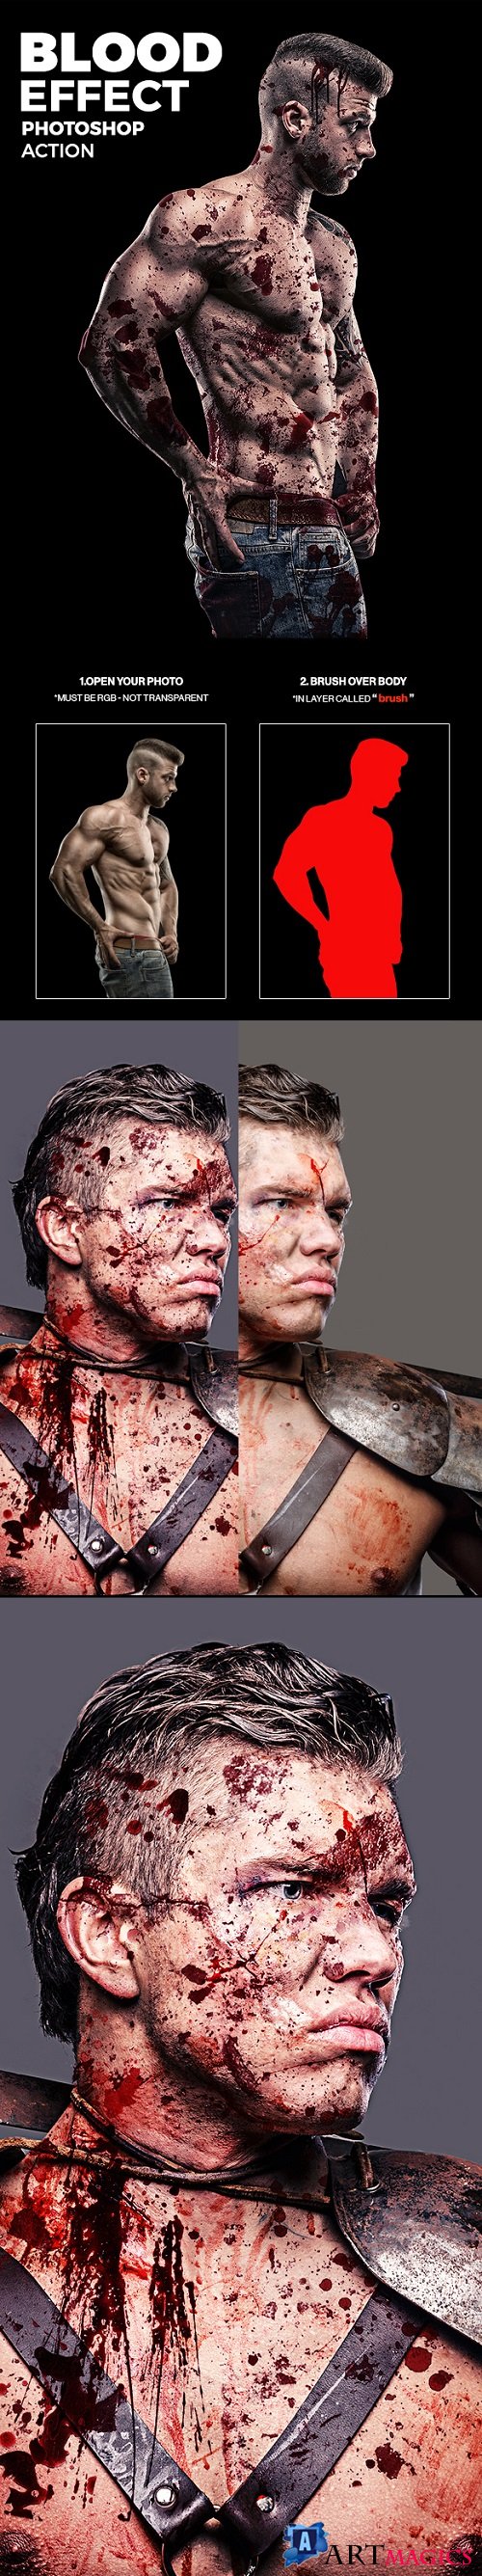 Blood Effect Photoshop Action 21091265